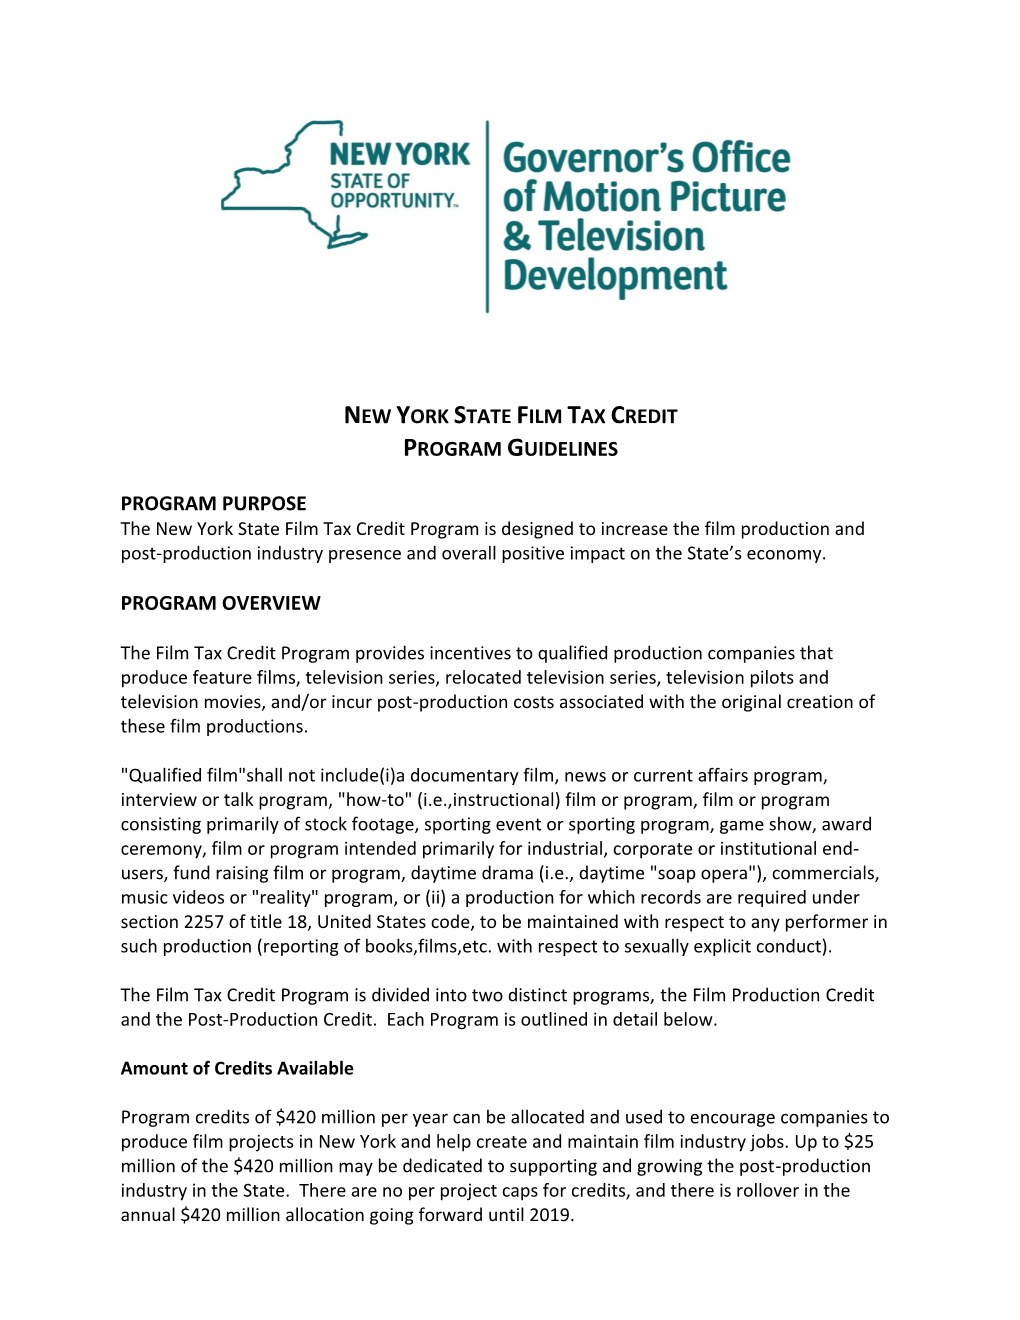 New York State Film Tax Credit Program Guidelines